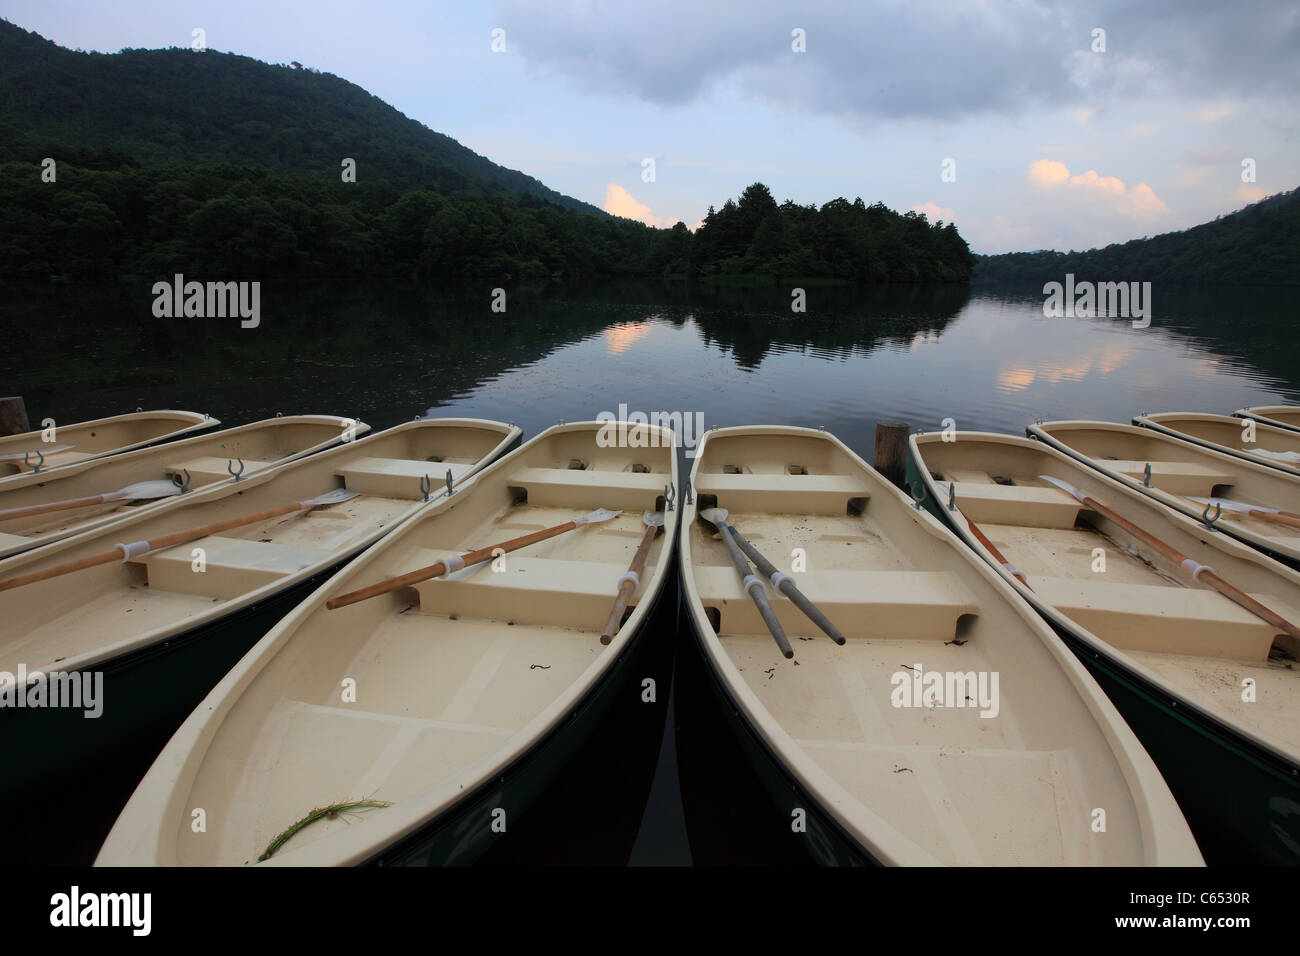 Boats Line Up in Lake Side Stock Photo